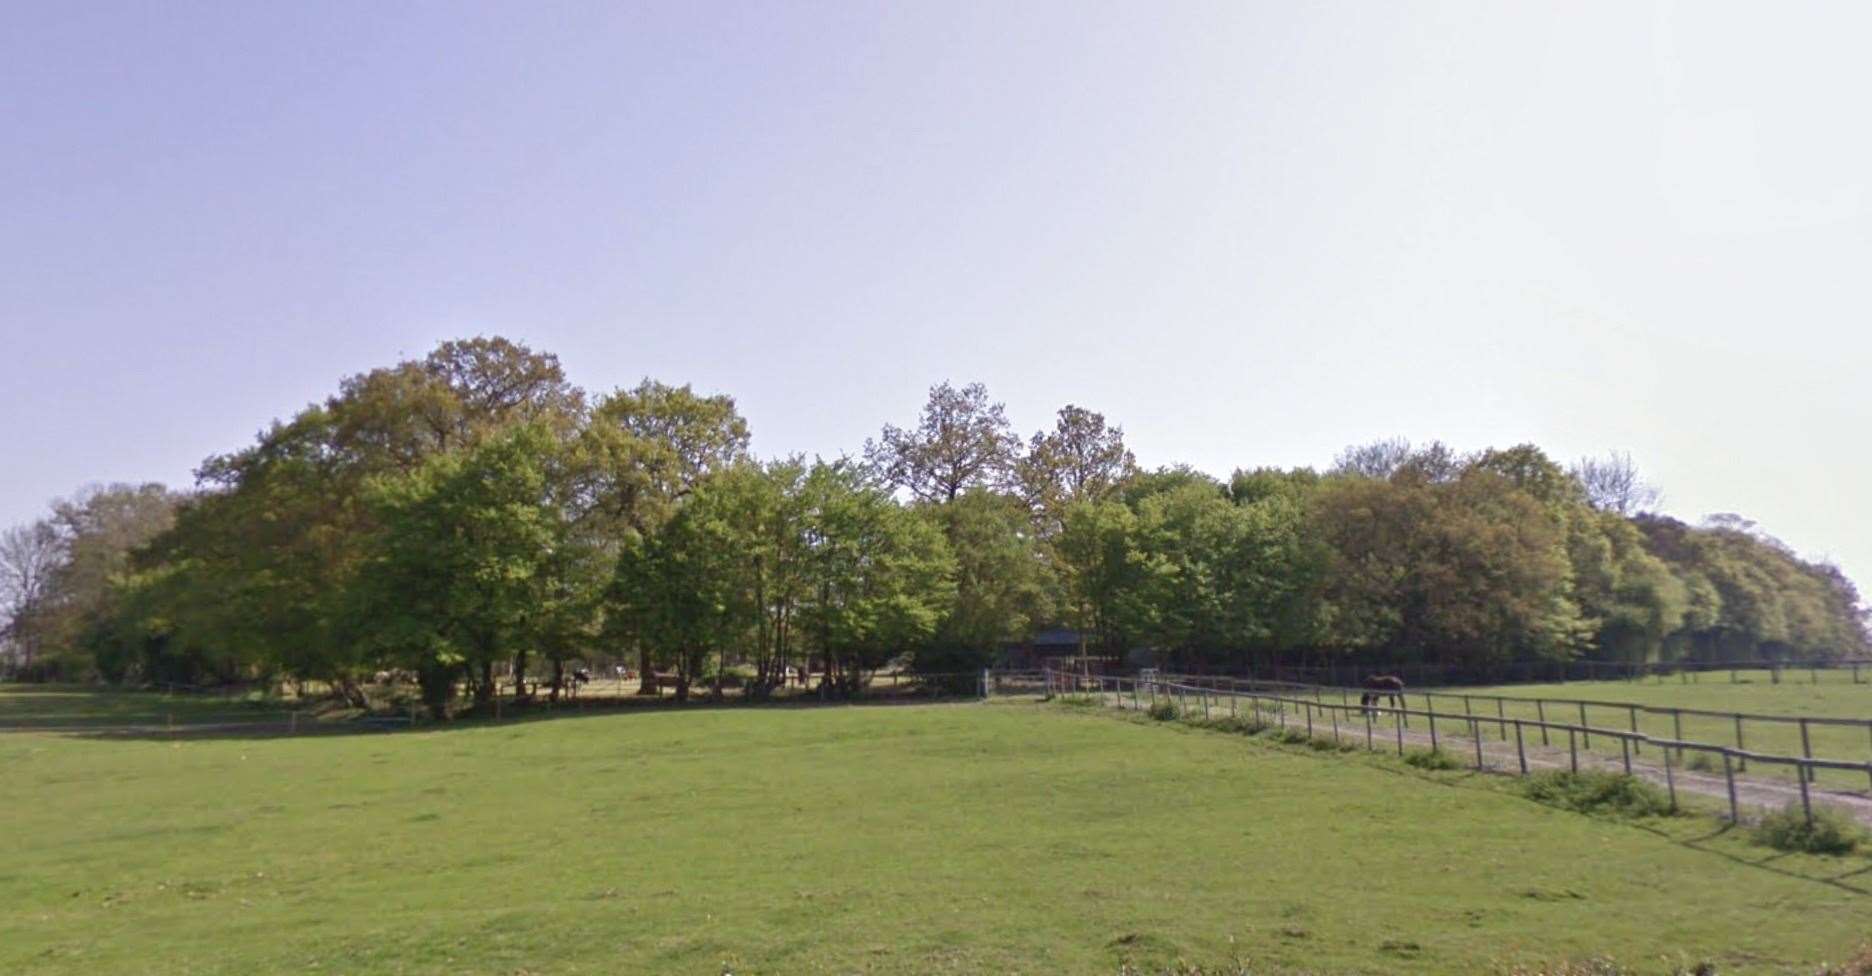 A body was found in Isaac Wood, near Kingsnorth. Picture: Google